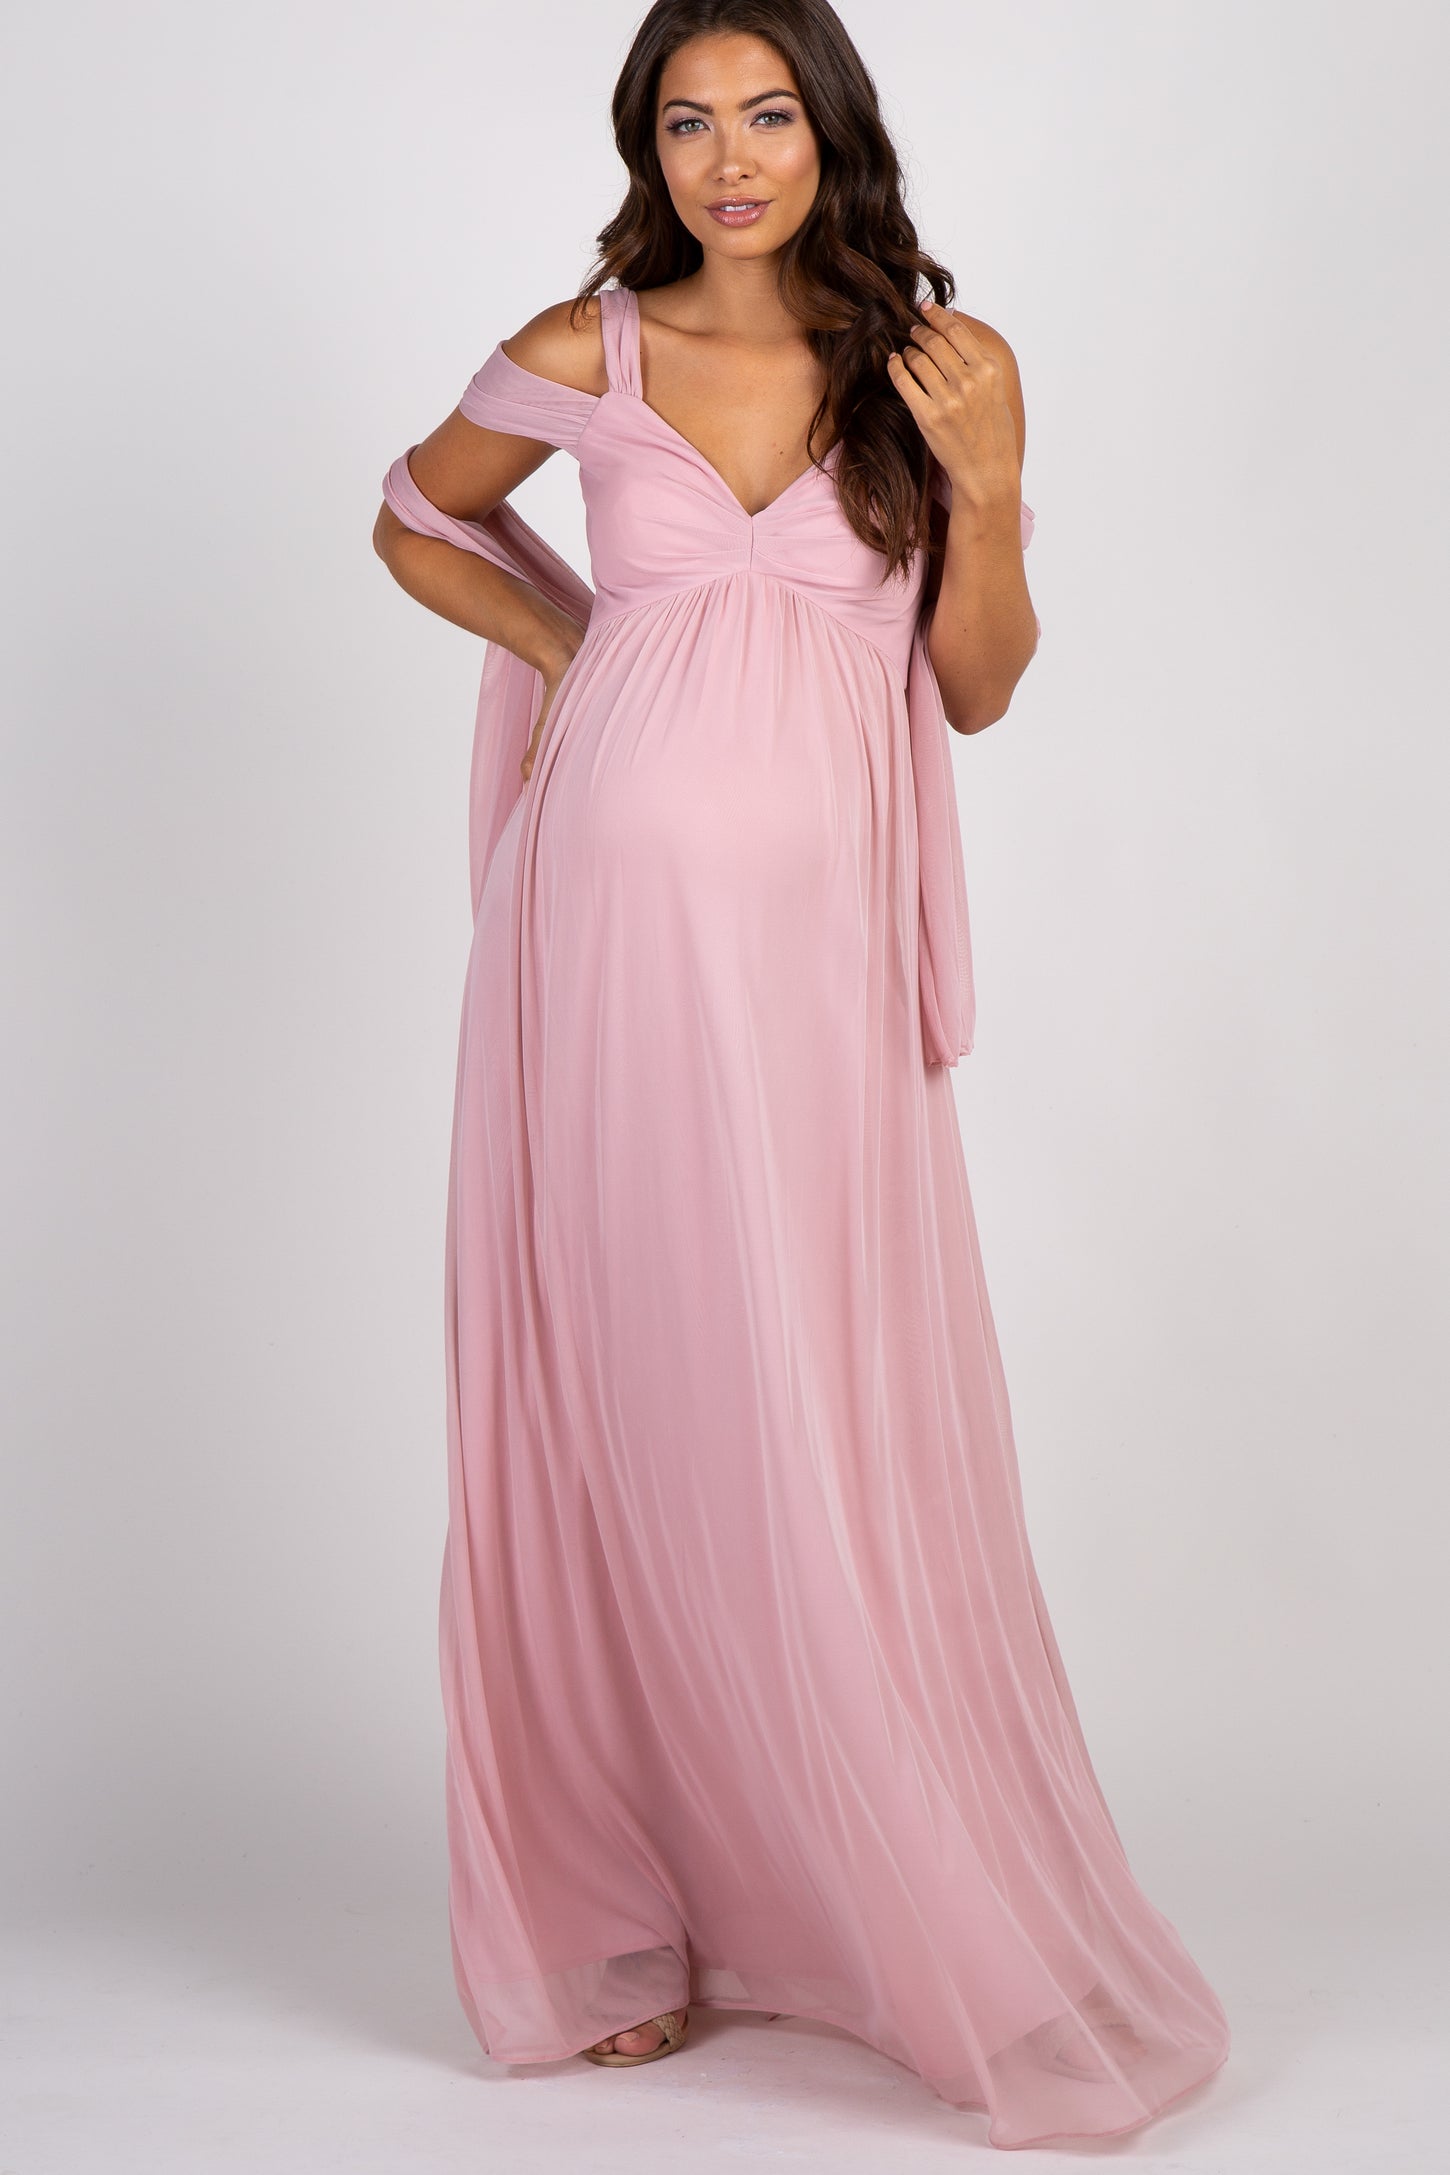 Light Pink Chiffon Cold Shoulder Maternity Evening Gown